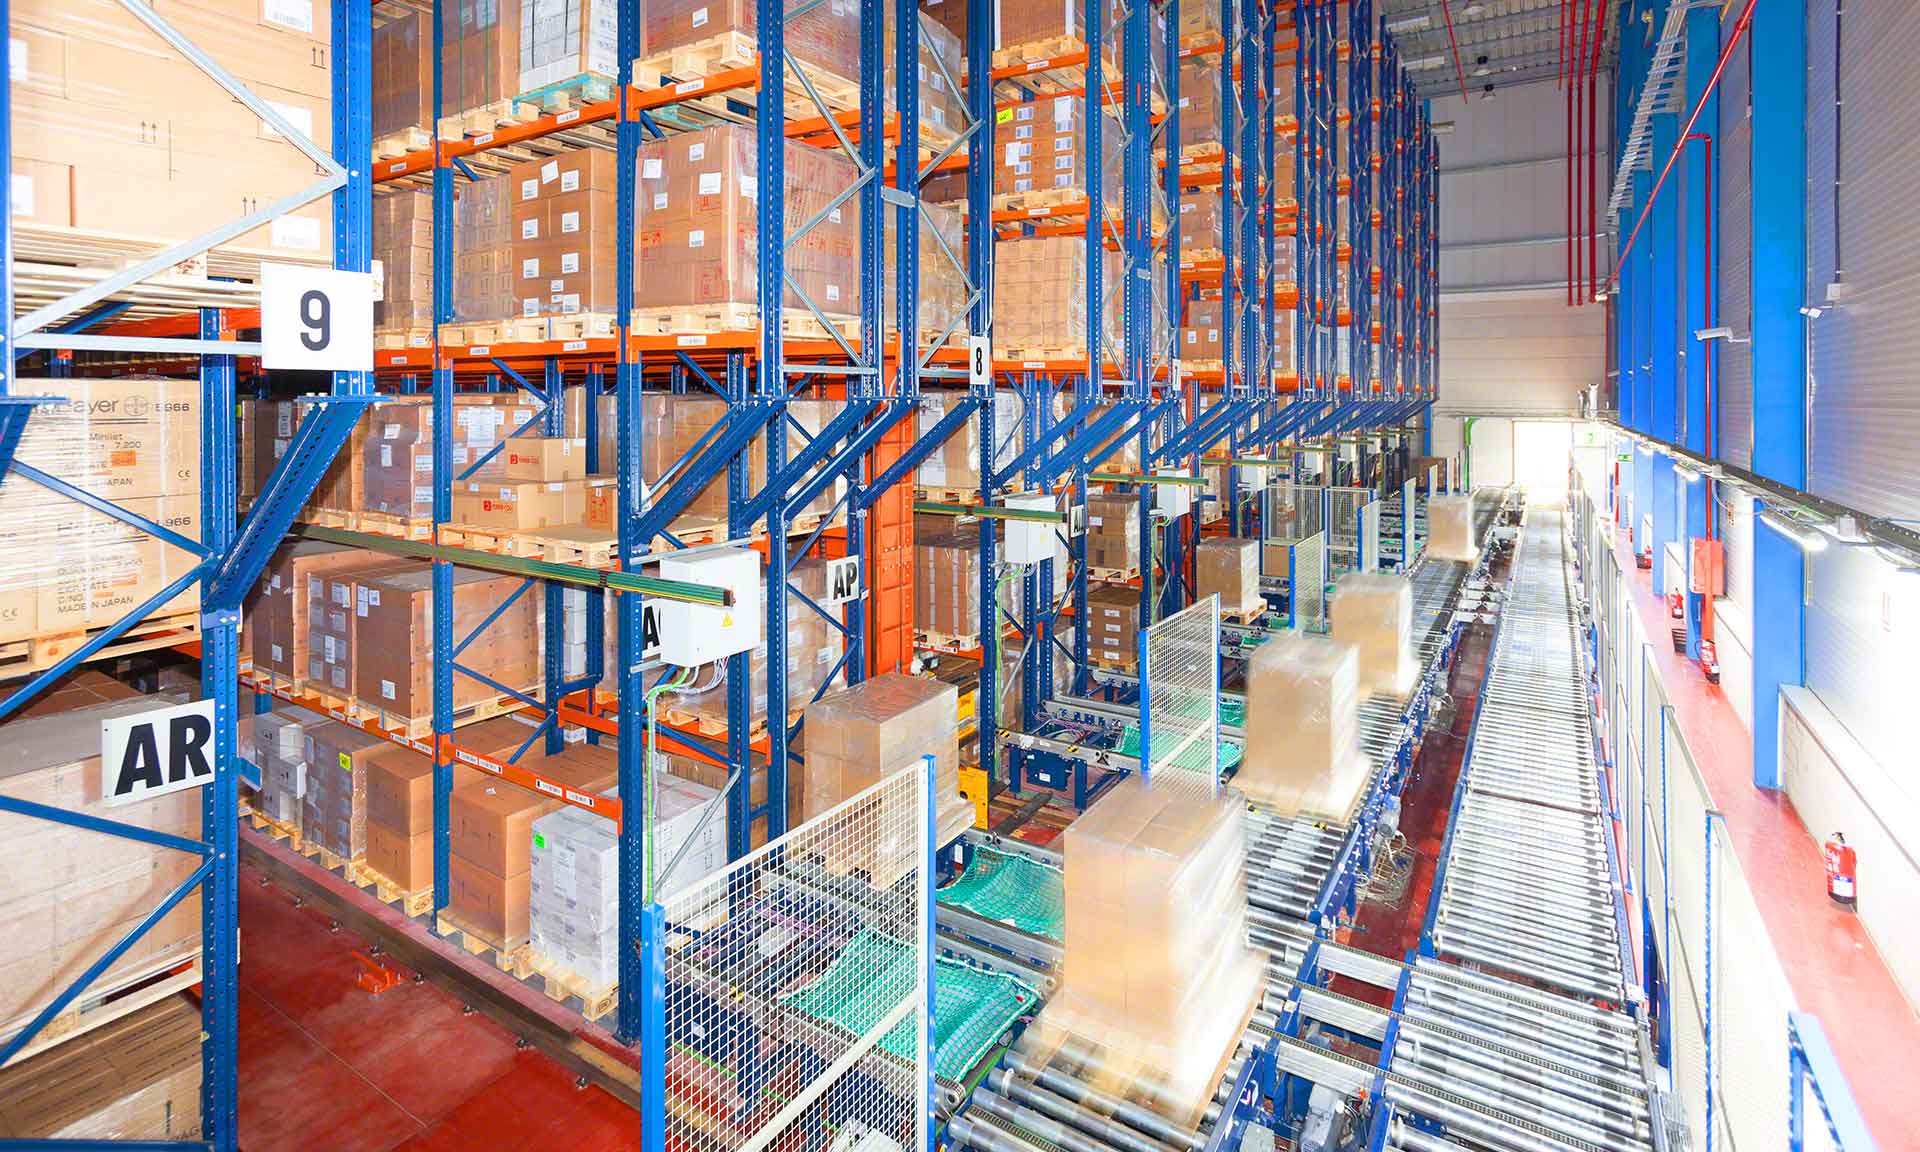 Automated replenishment systems: how do they work?